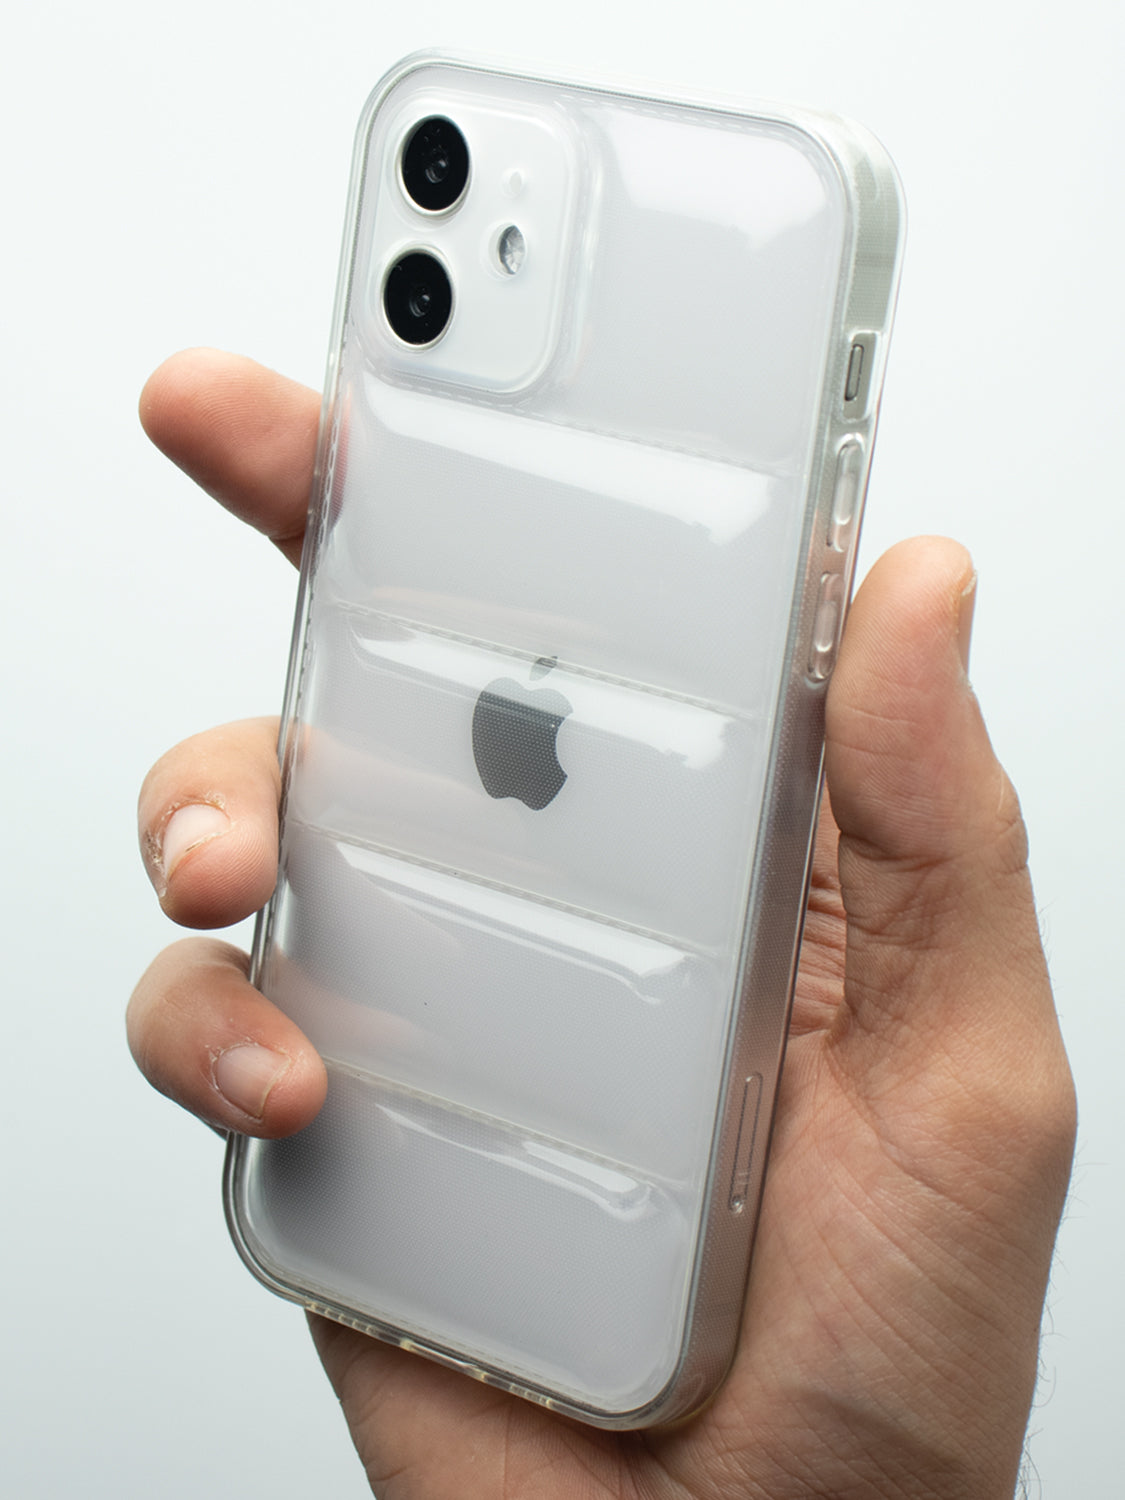 stylish back cover for iphone 12 , shockproof puffer case for iphone 12 , shockproof cover for iphone 12 , shockproof case cover for iphone 12 , shockproof back cover for iphone 12 , clear puffer case for iphone 12